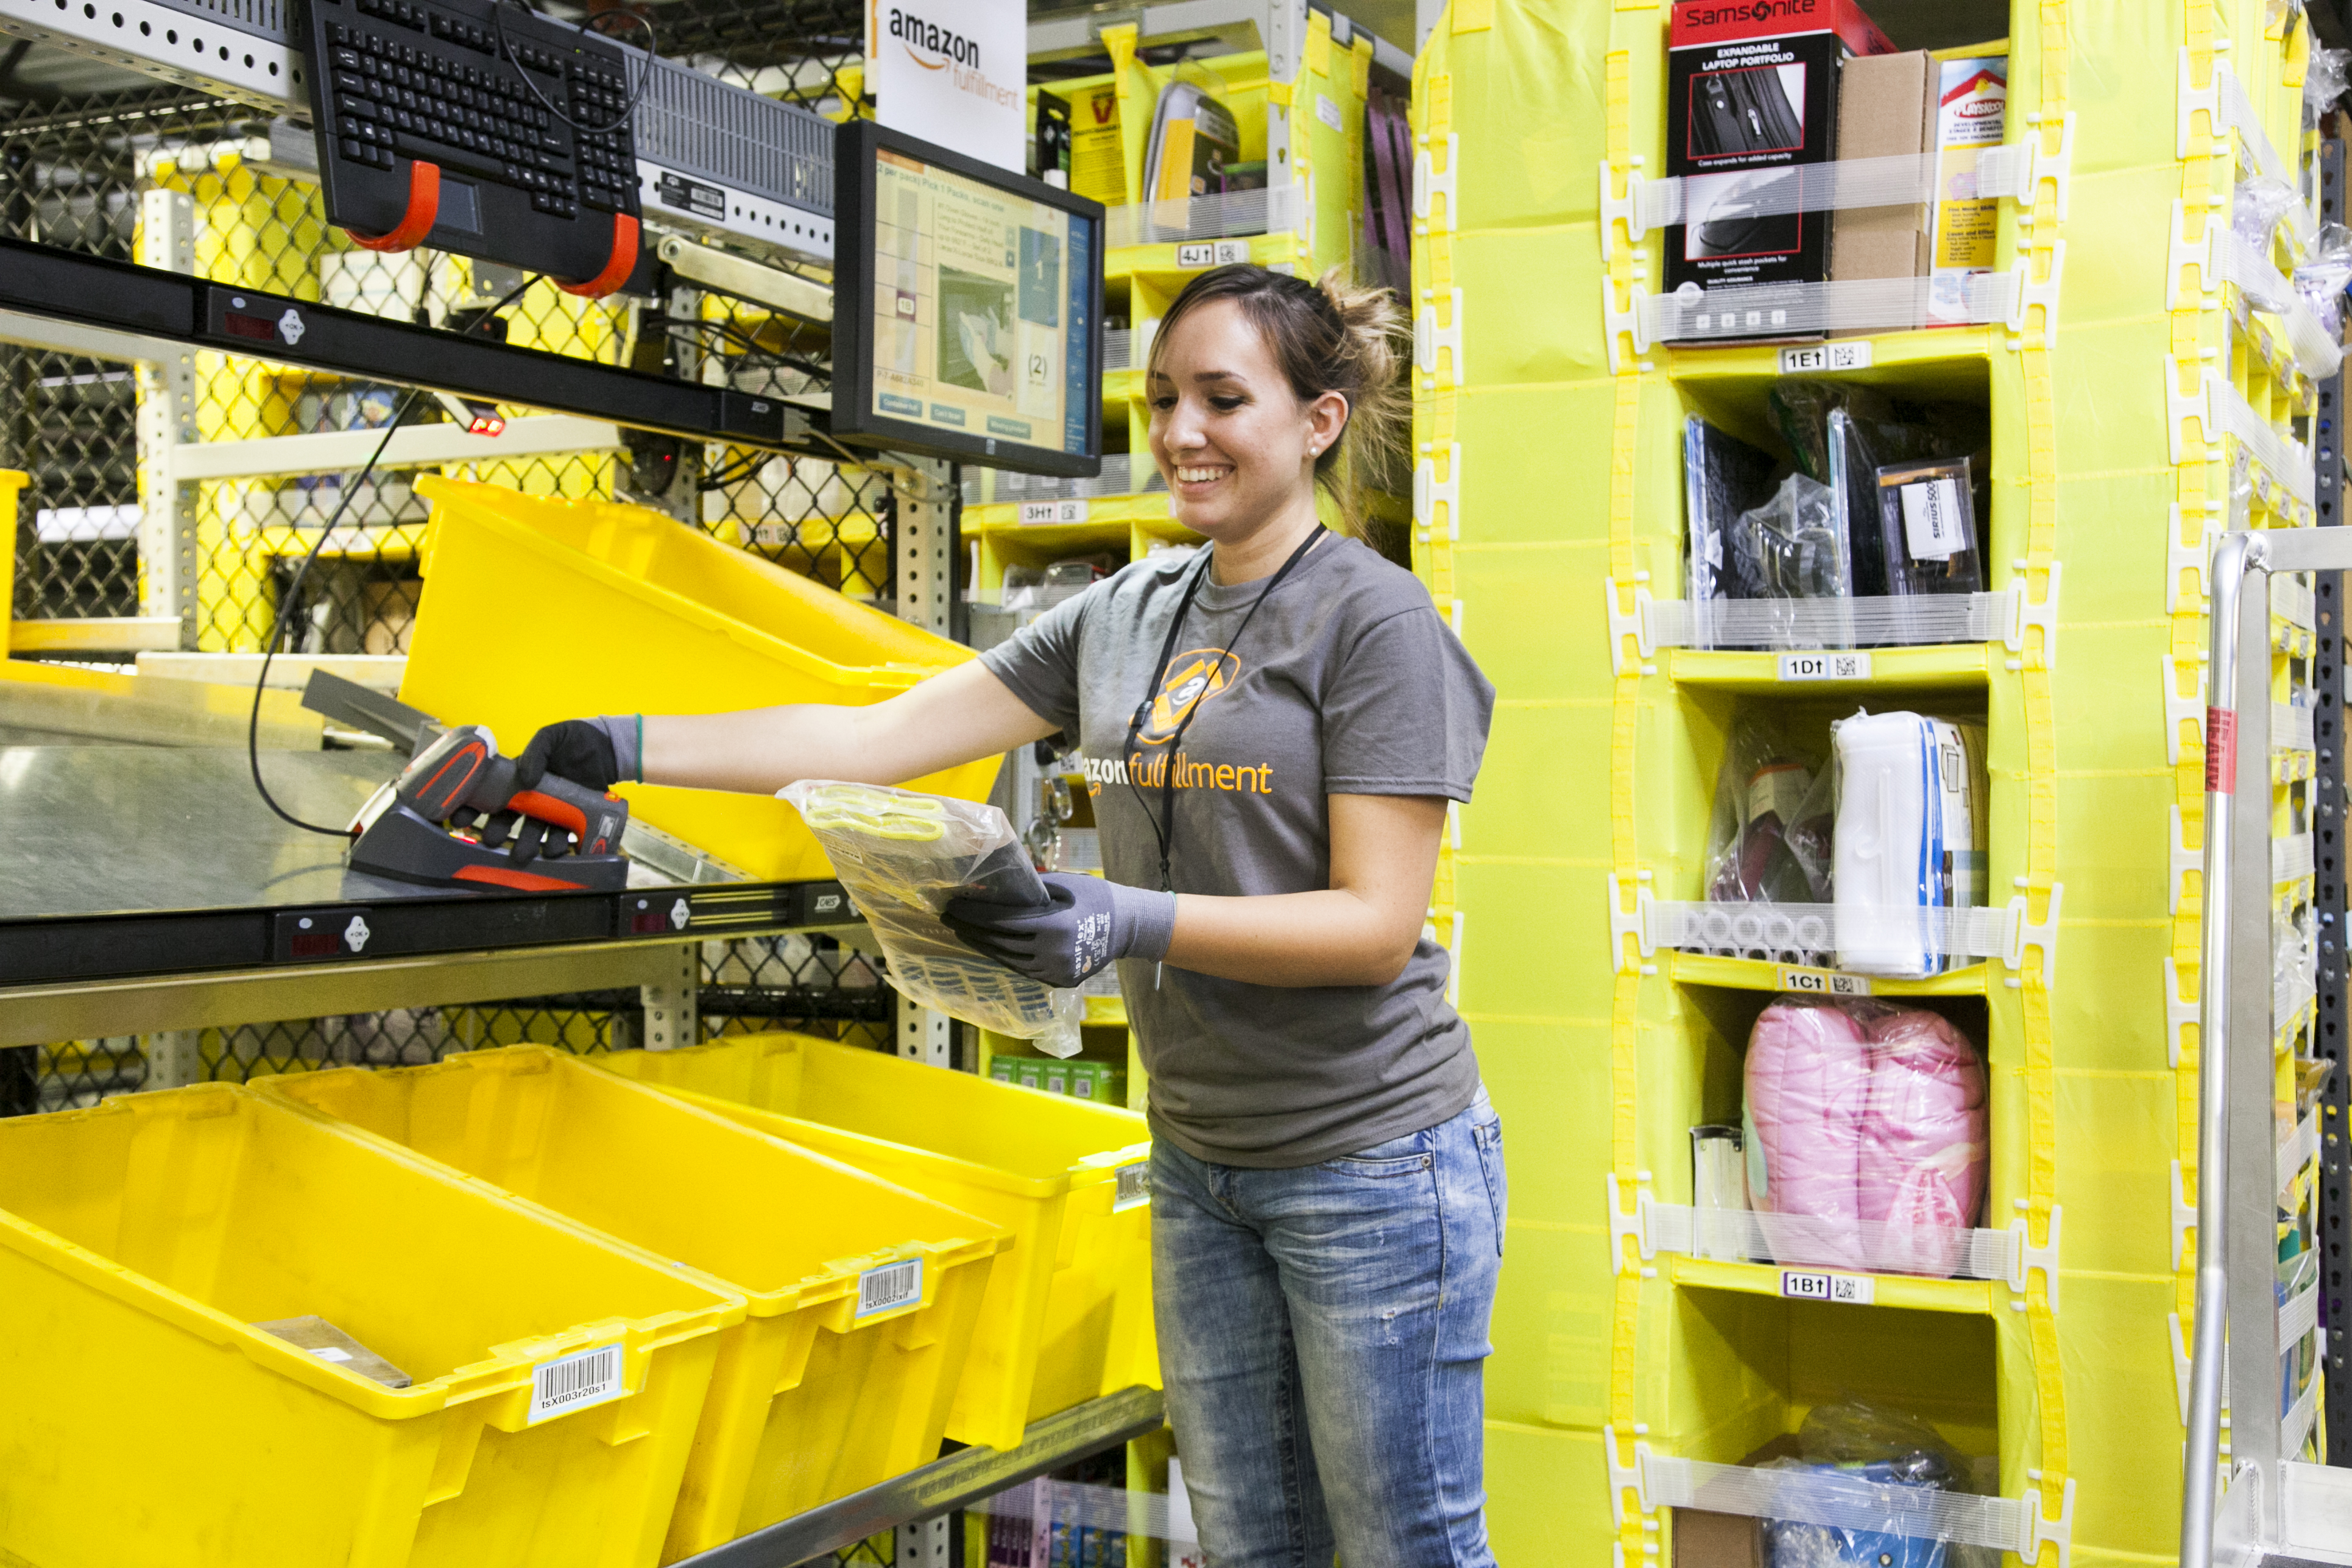 Amazon warehouse jobs are some of the most in-demand positions due to competitive pay and solid benefits.